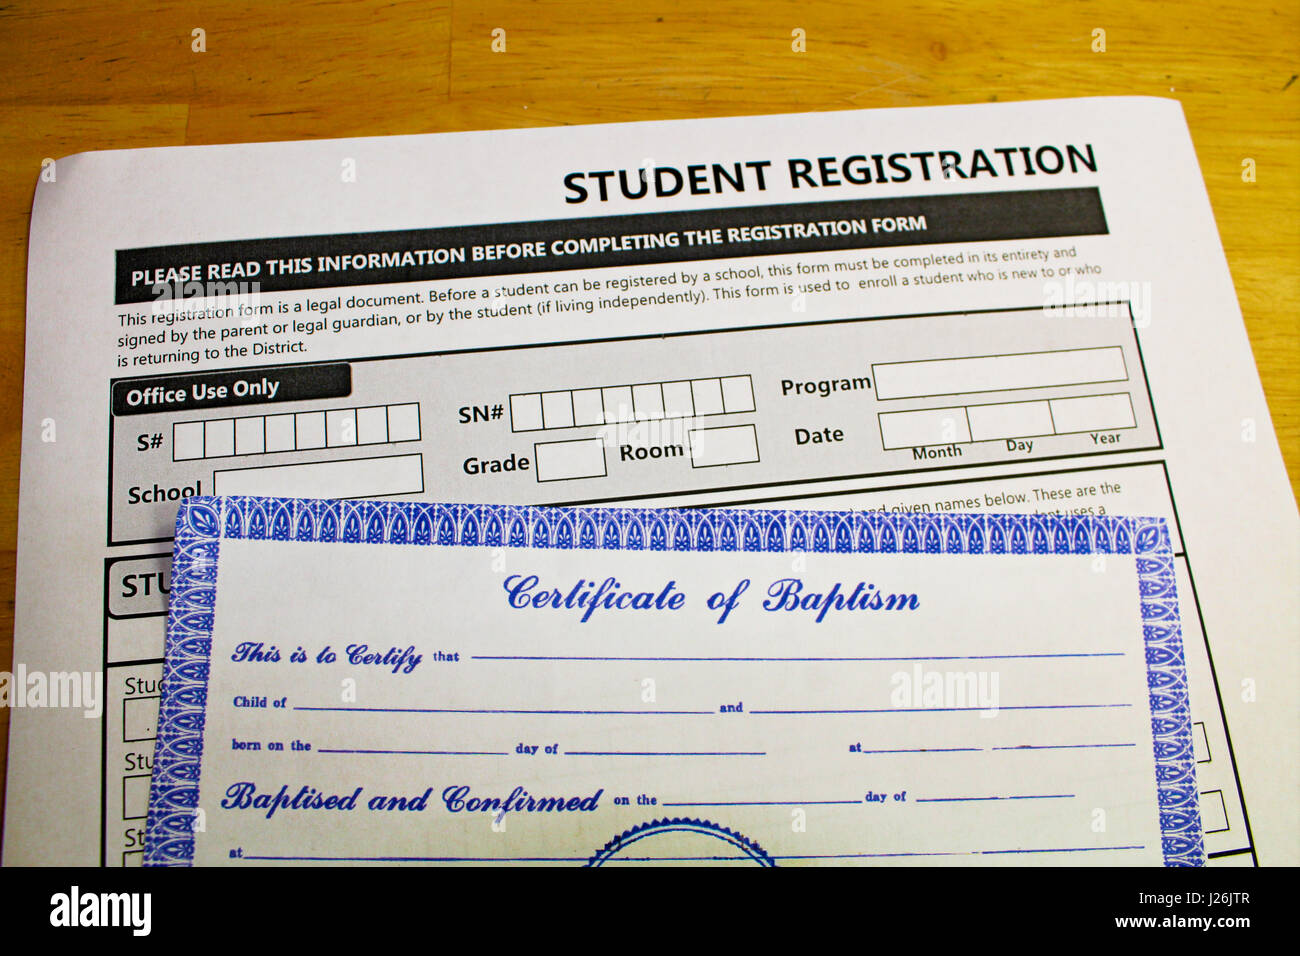 Proving faith in order to register in schools. Stock Photo